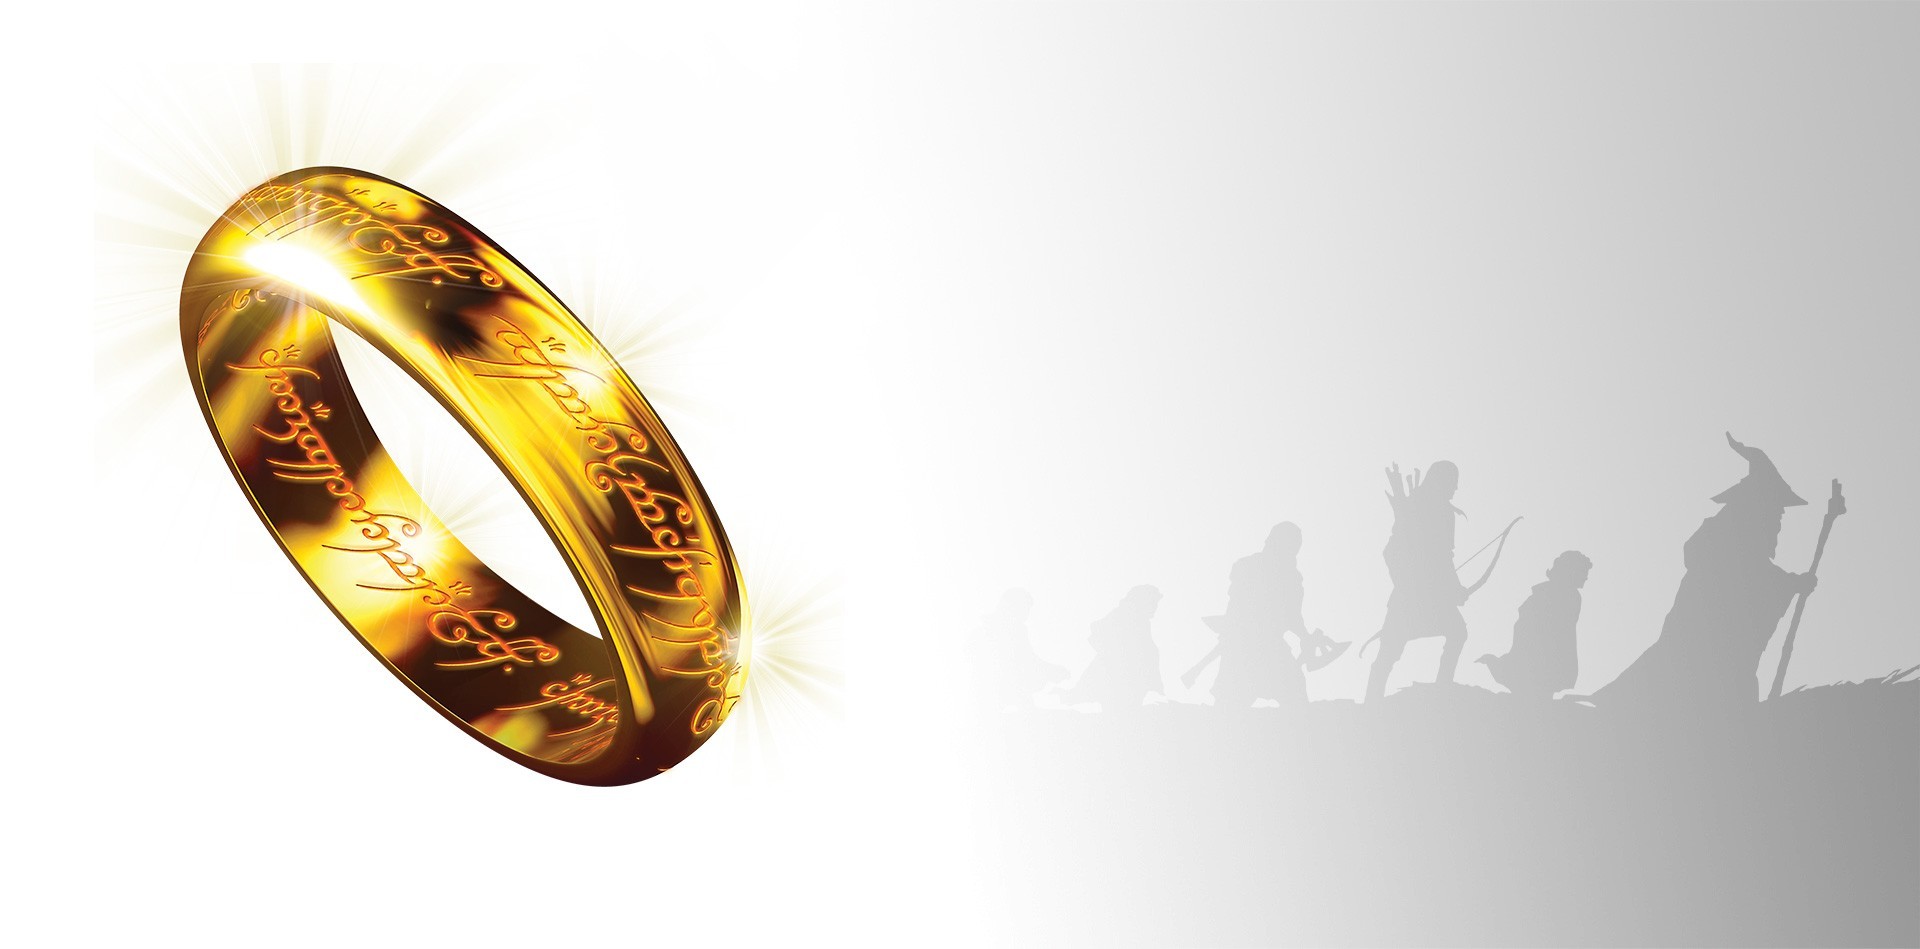 Official products Lord of the Rings | Subsonic